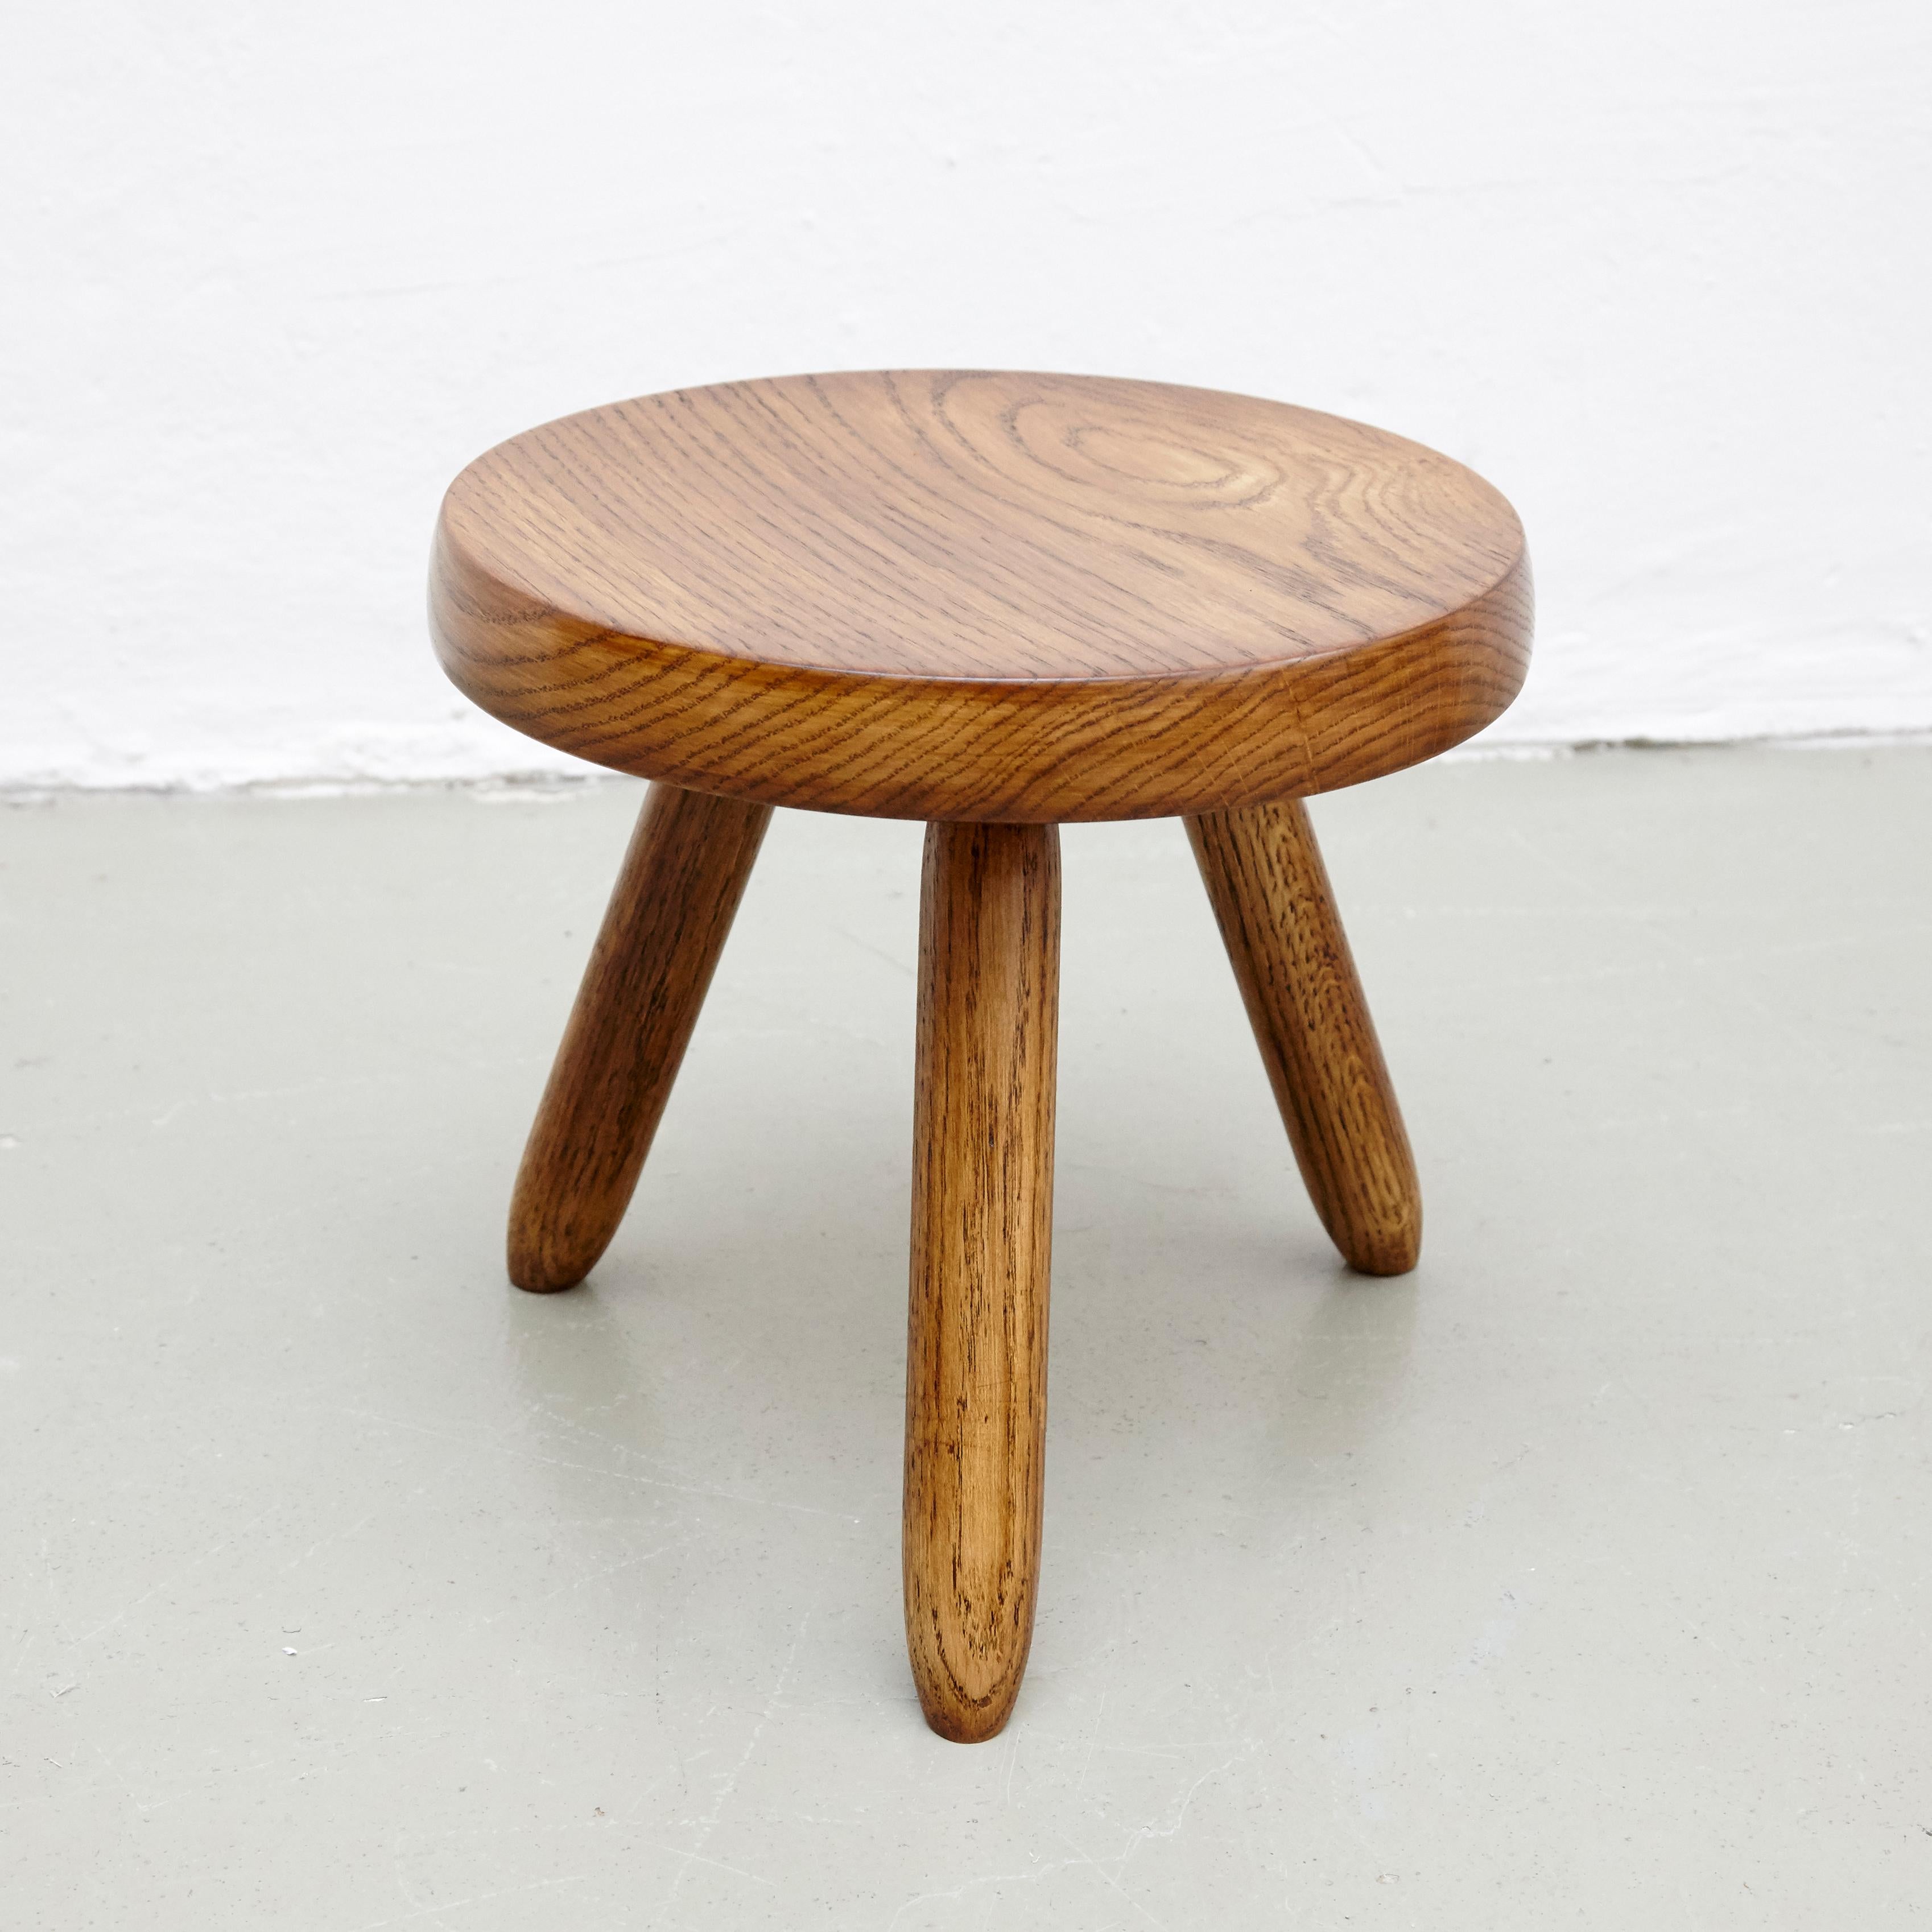 Pair of Stools in the Style of Charlotte Perriand 1